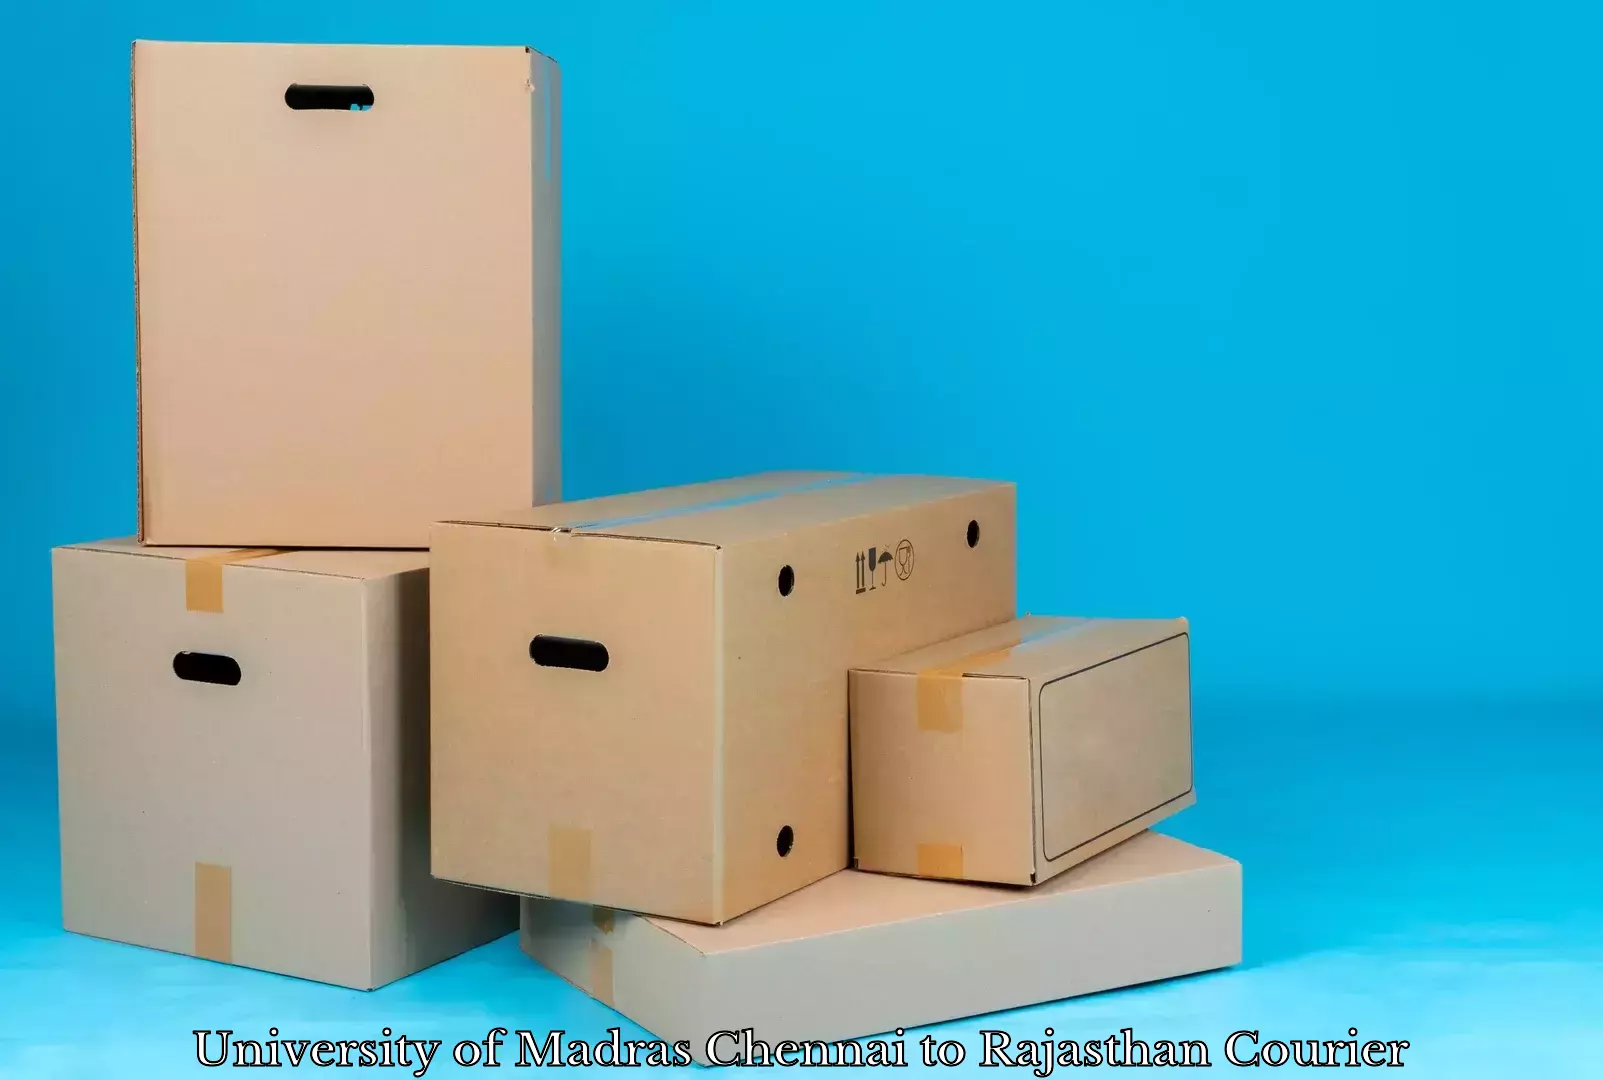 Furniture relocation experts University of Madras Chennai to Bajore